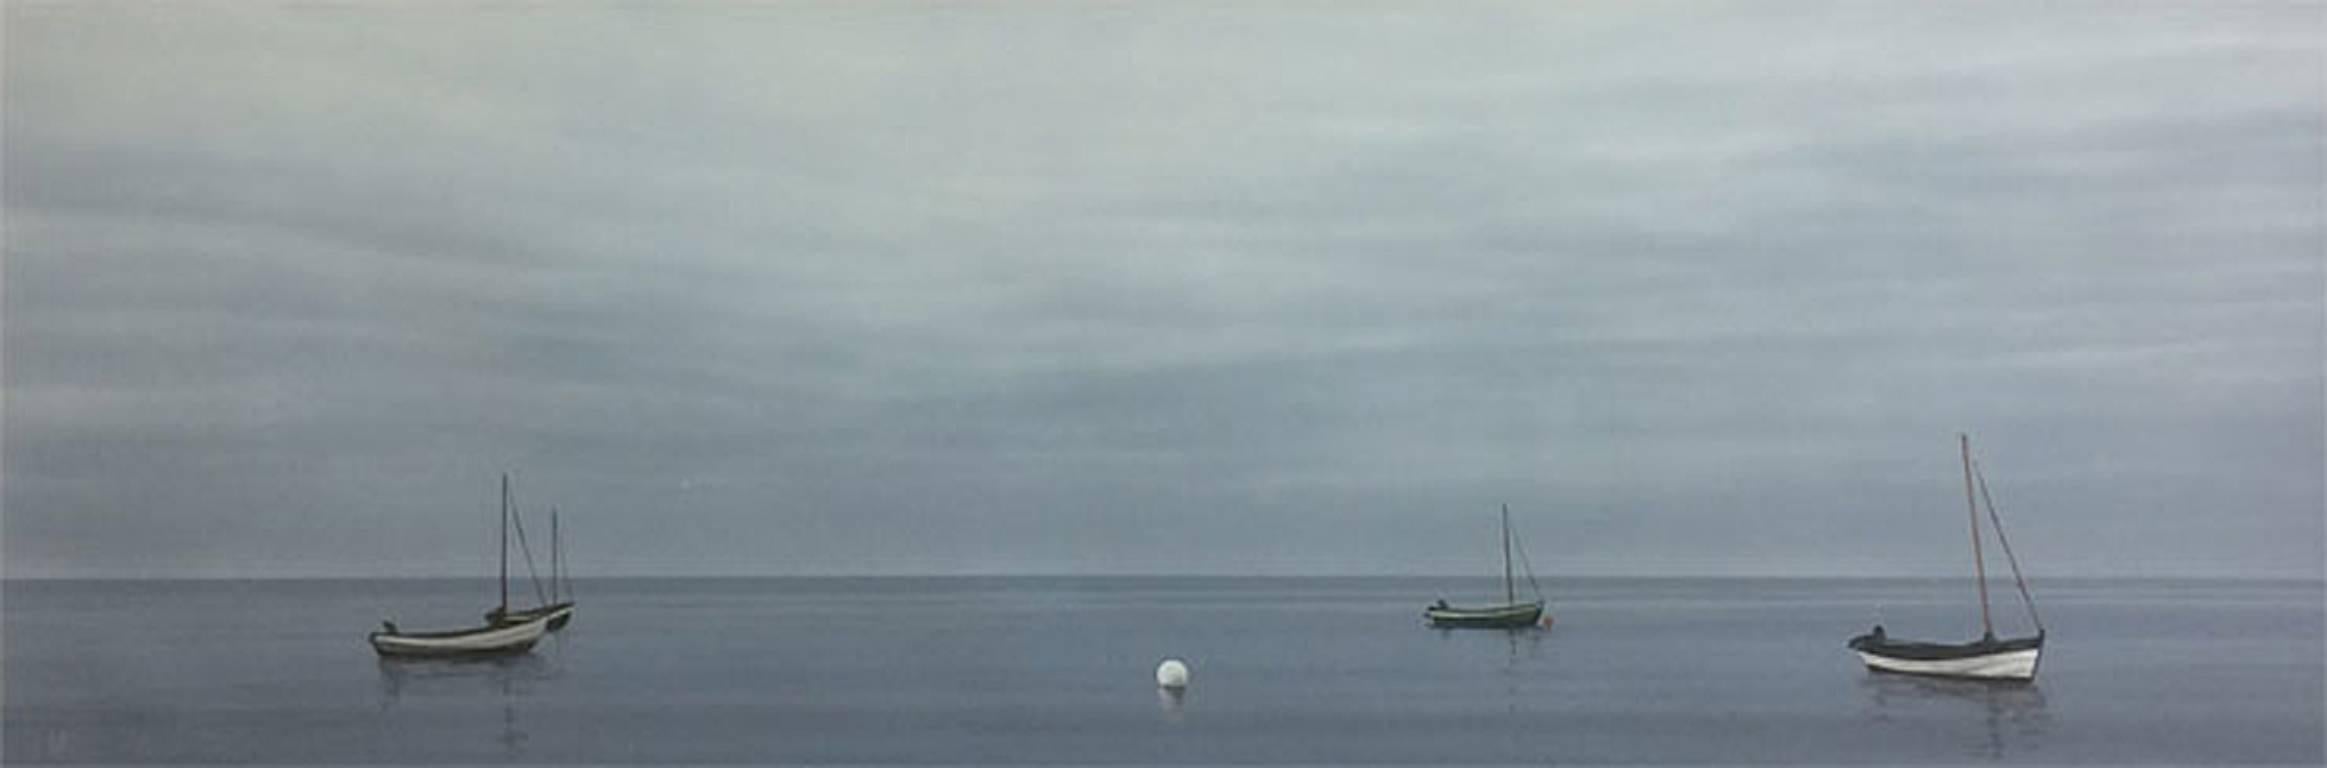 Grey Dawn with Boats - contemporary seaside beach landscape painting - Painting by Terry Watts